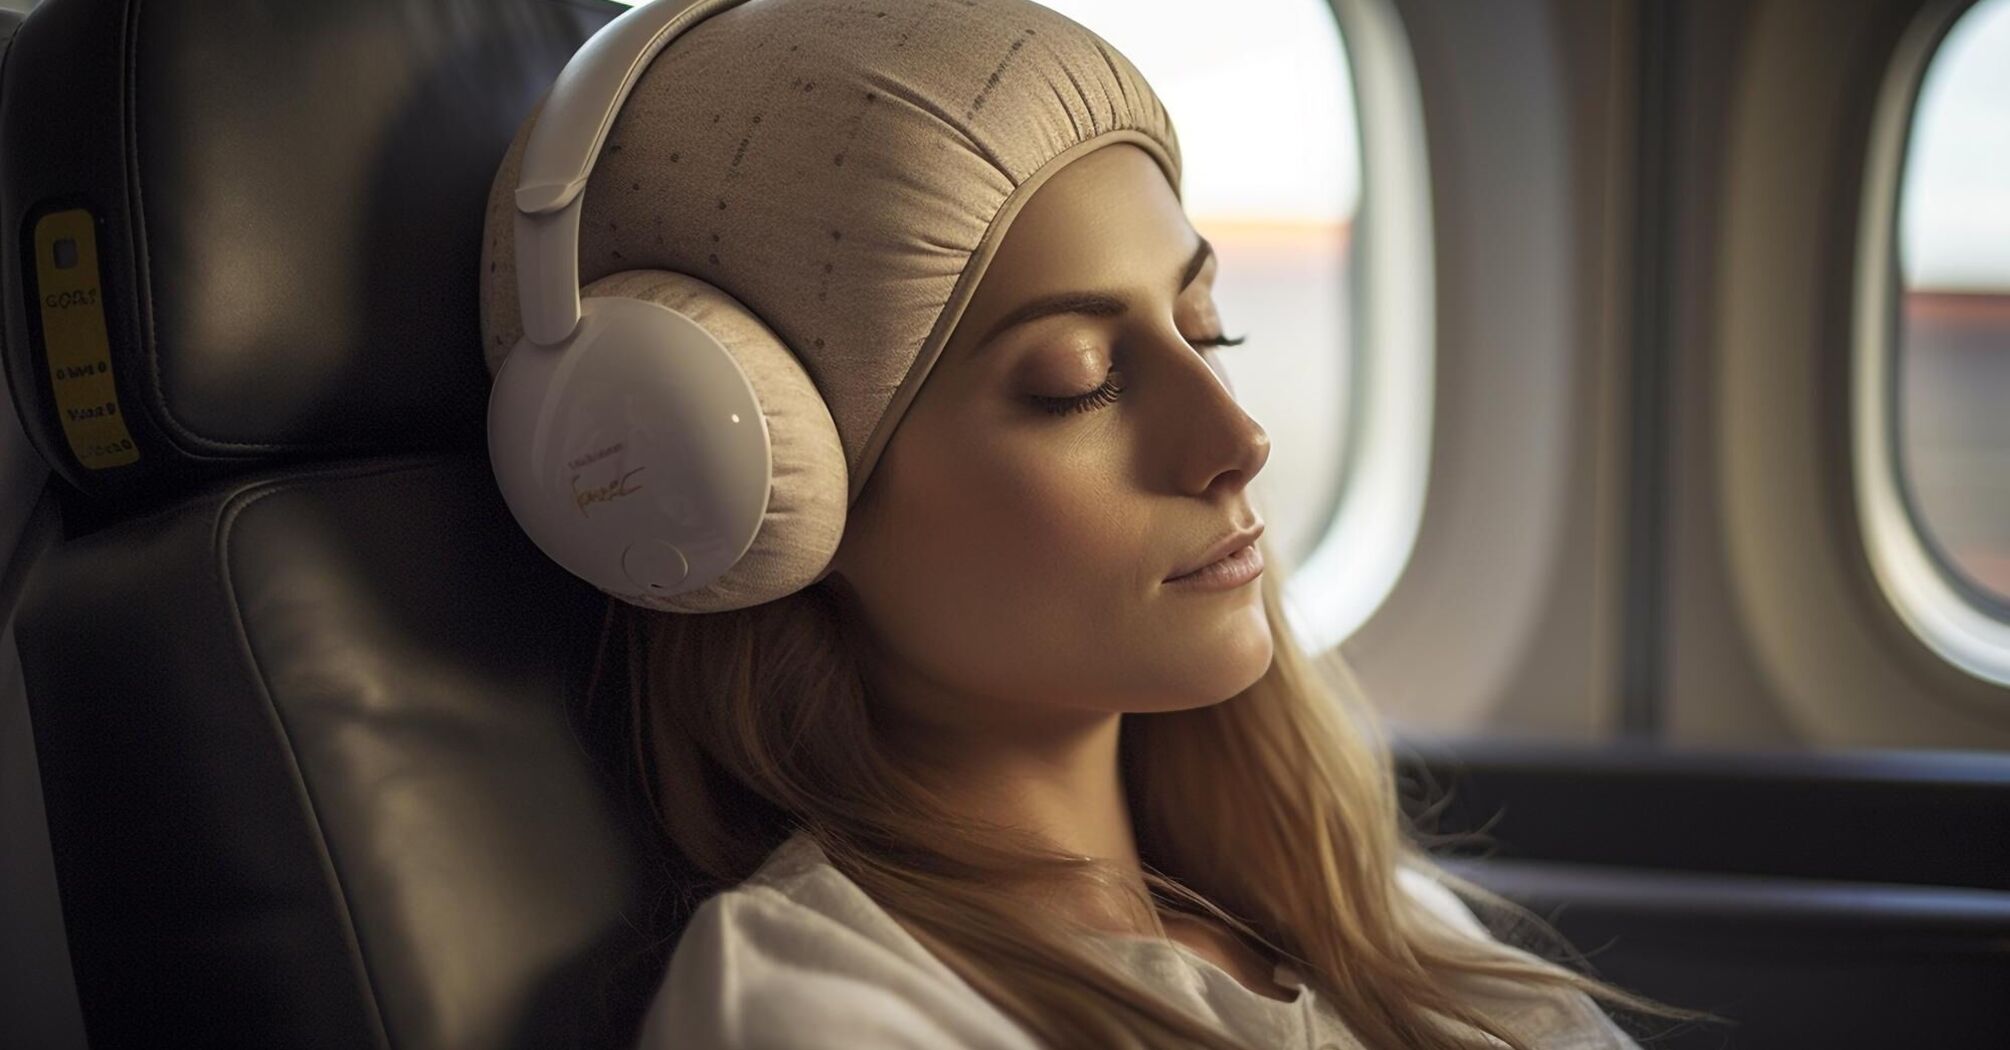 Sweet dreams on the plane: tips to help you fall asleep during the flight